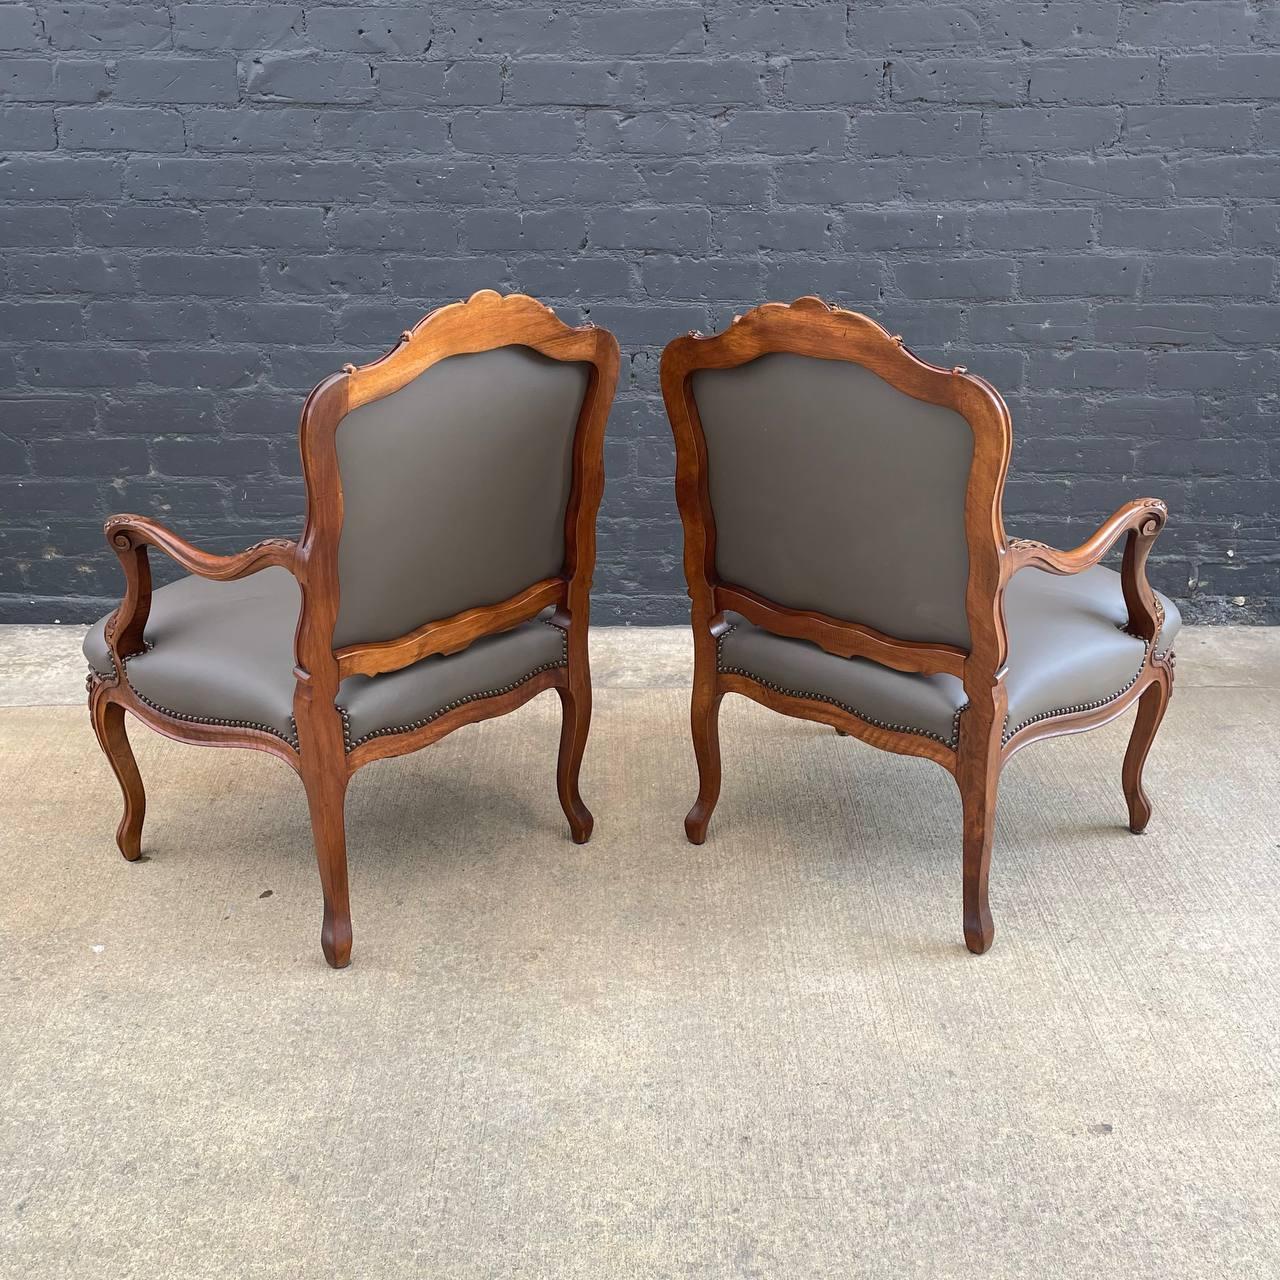 Early 20th Century Pair of Antique French Louis XVI Carved Wood & Leather Arm Chairs For Sale